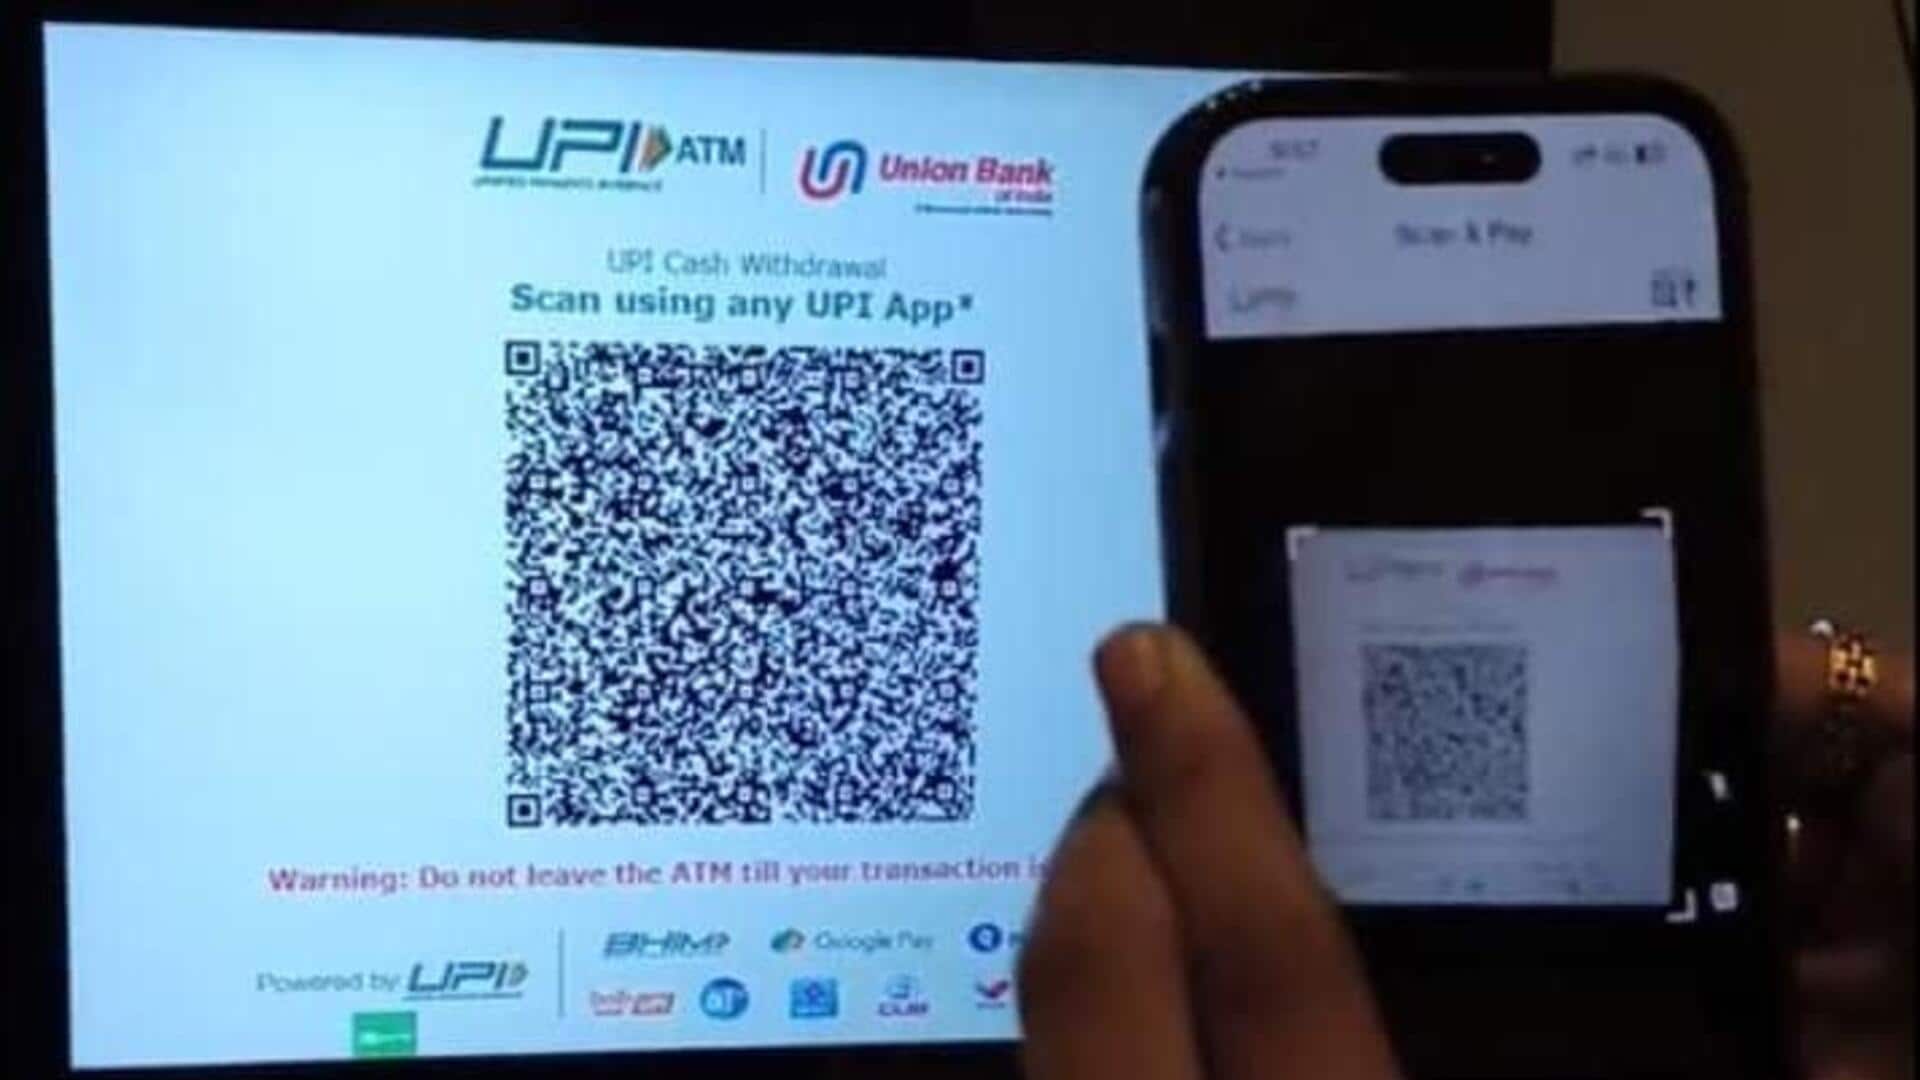 How to withdraw money from UPI ATM: A step-by-step guide 